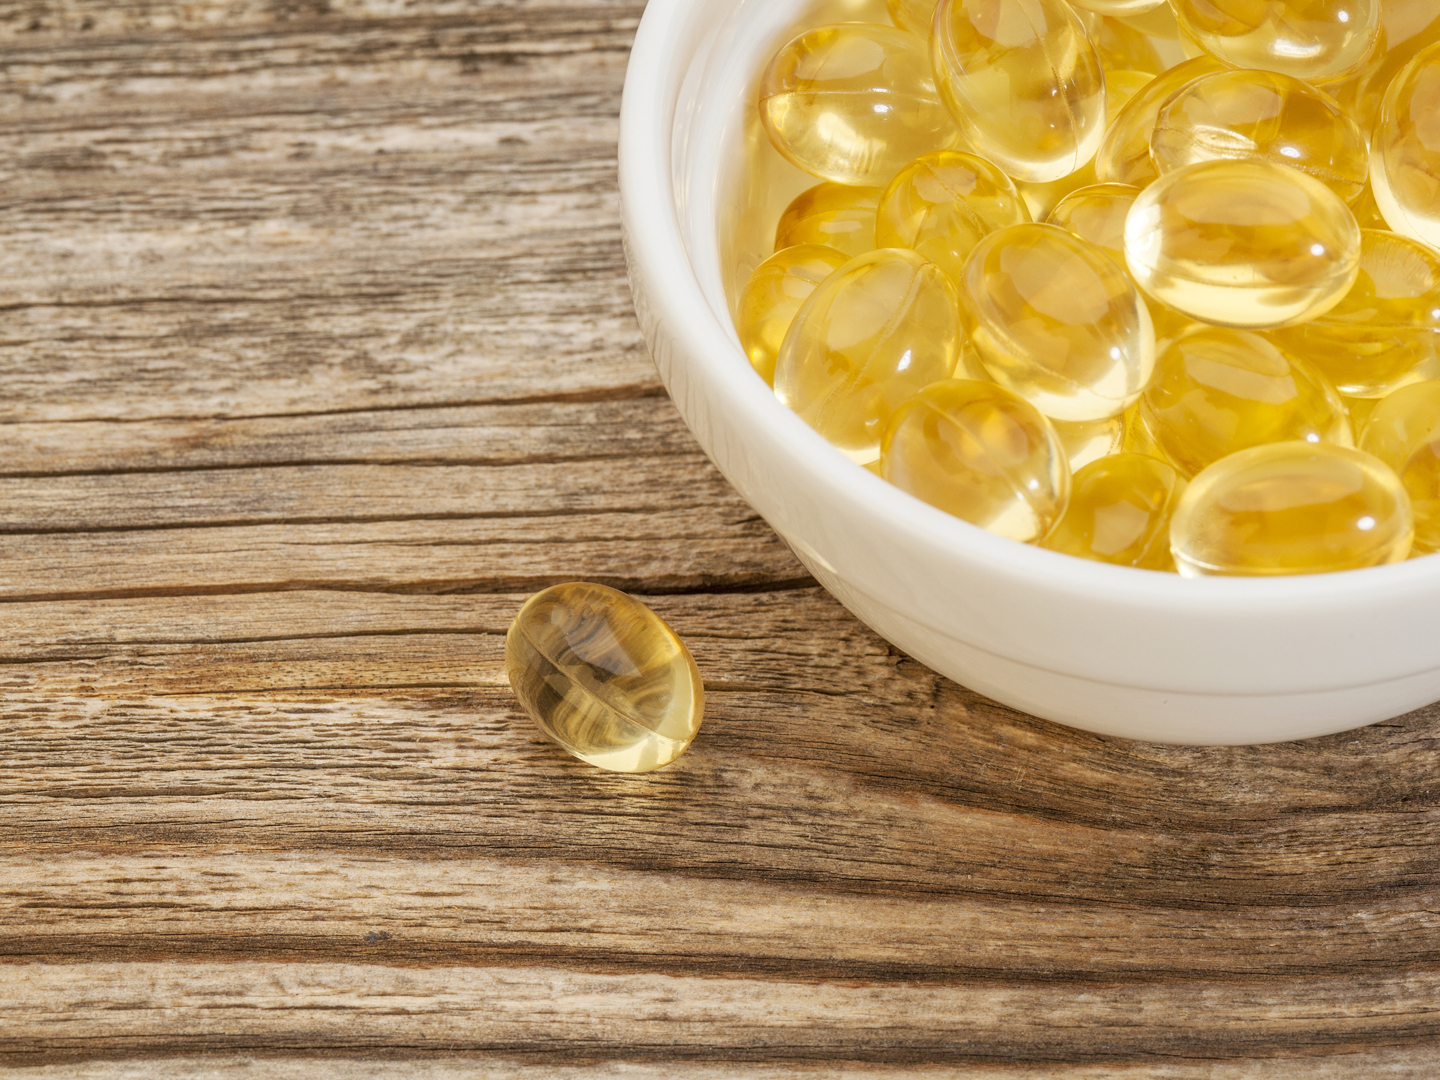 fish oil capsules - a small ceramic bowl on a grained wood